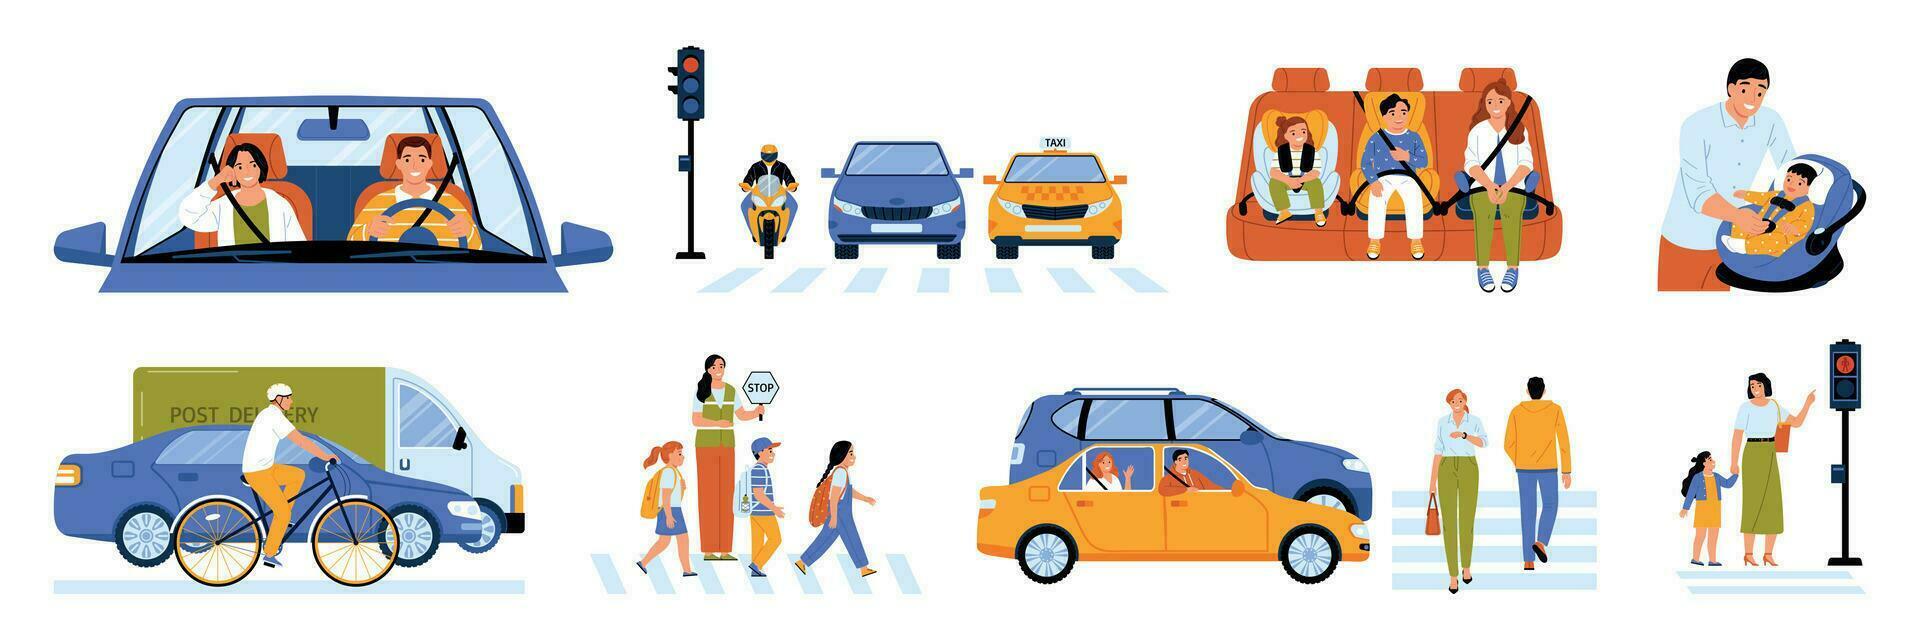 Safety And Transport Set vector